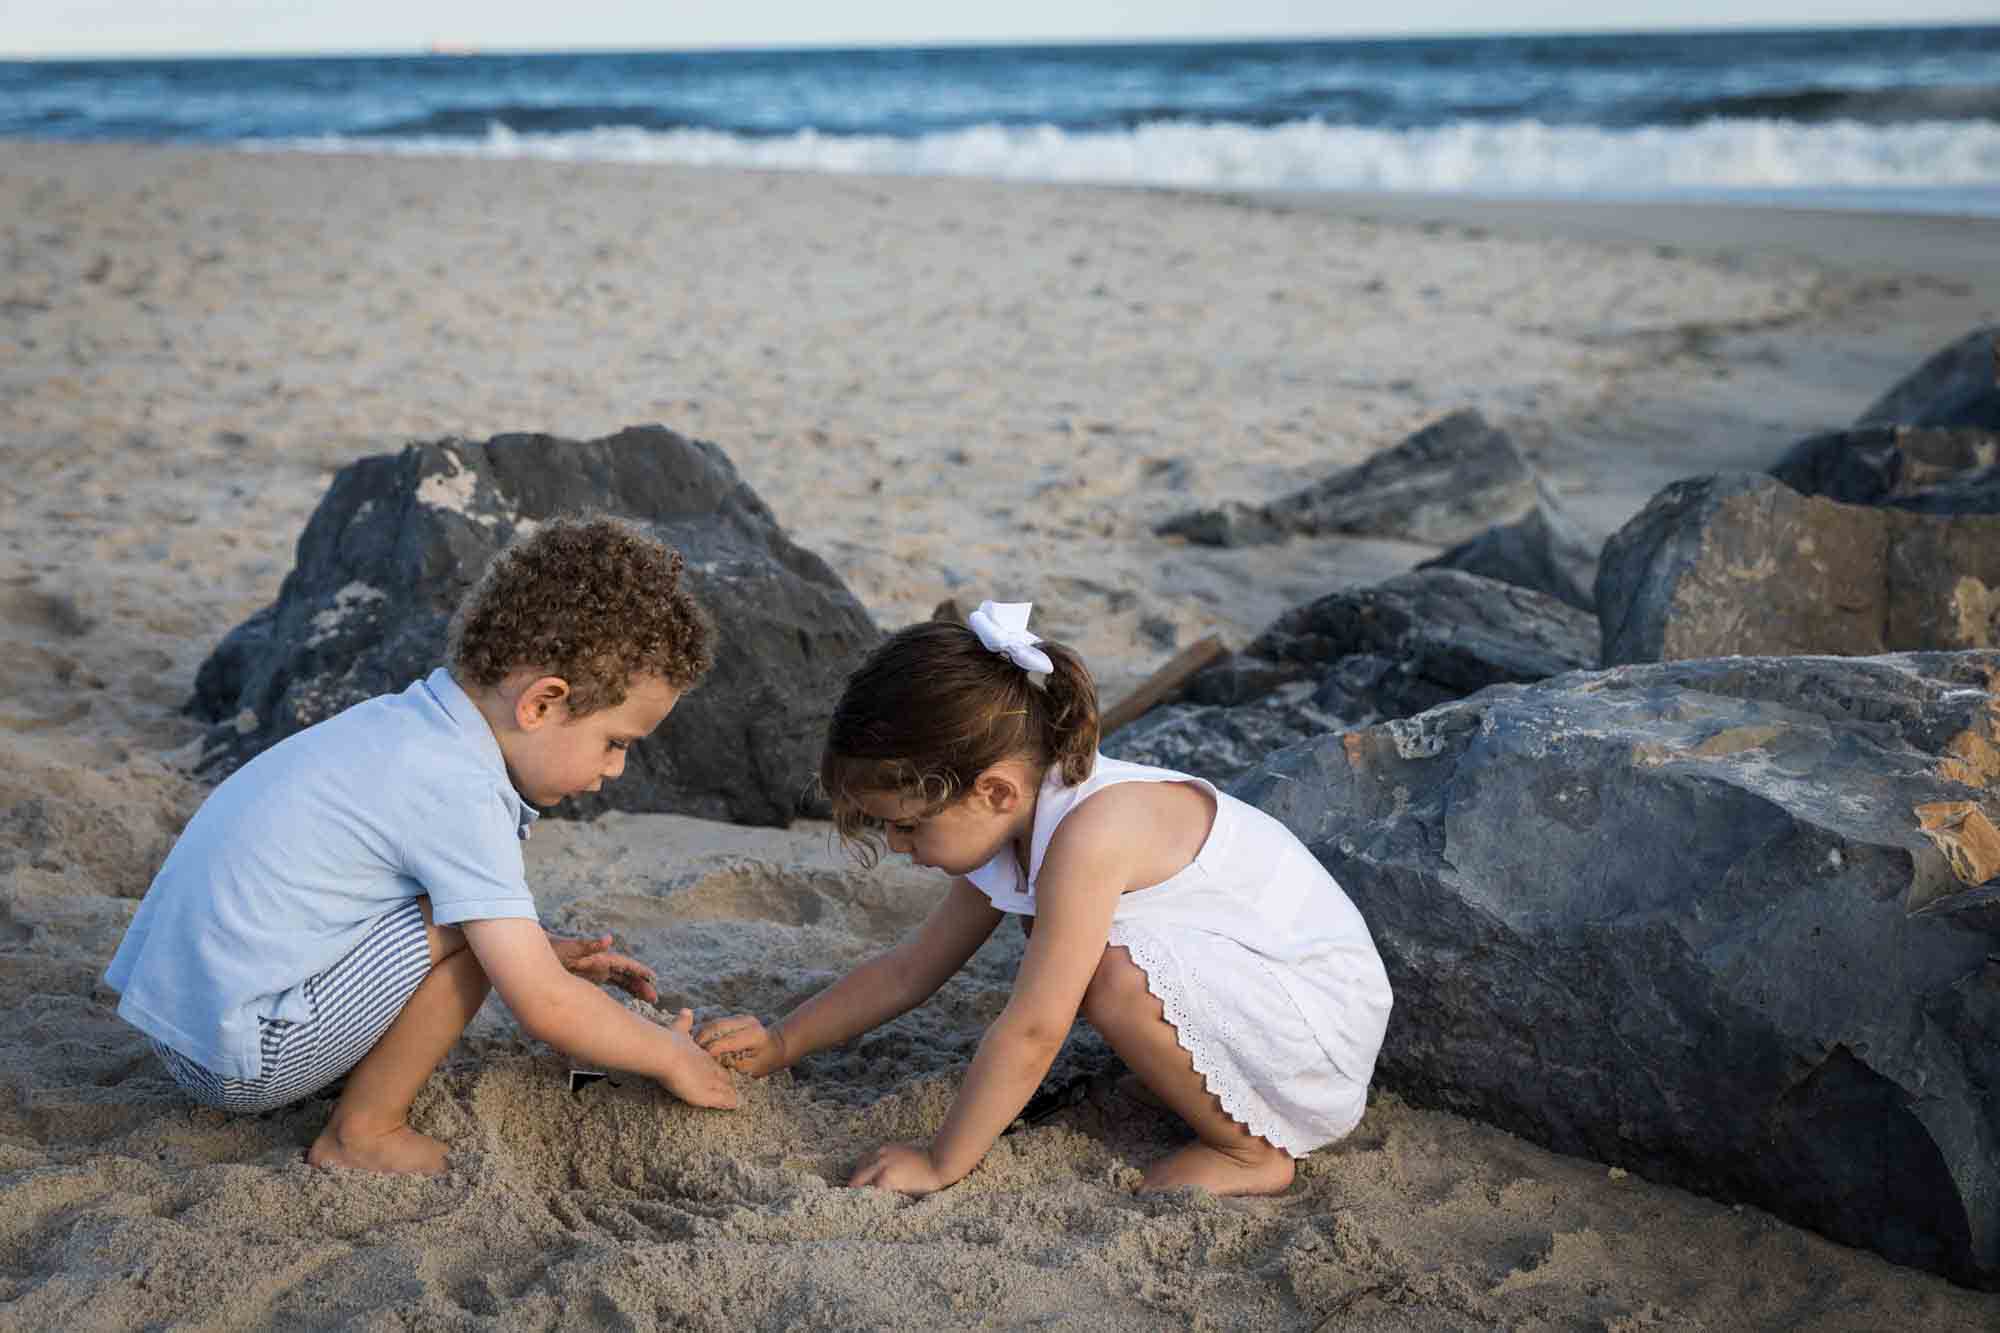 Beach family portrait of two children playing in sand in front of rocks